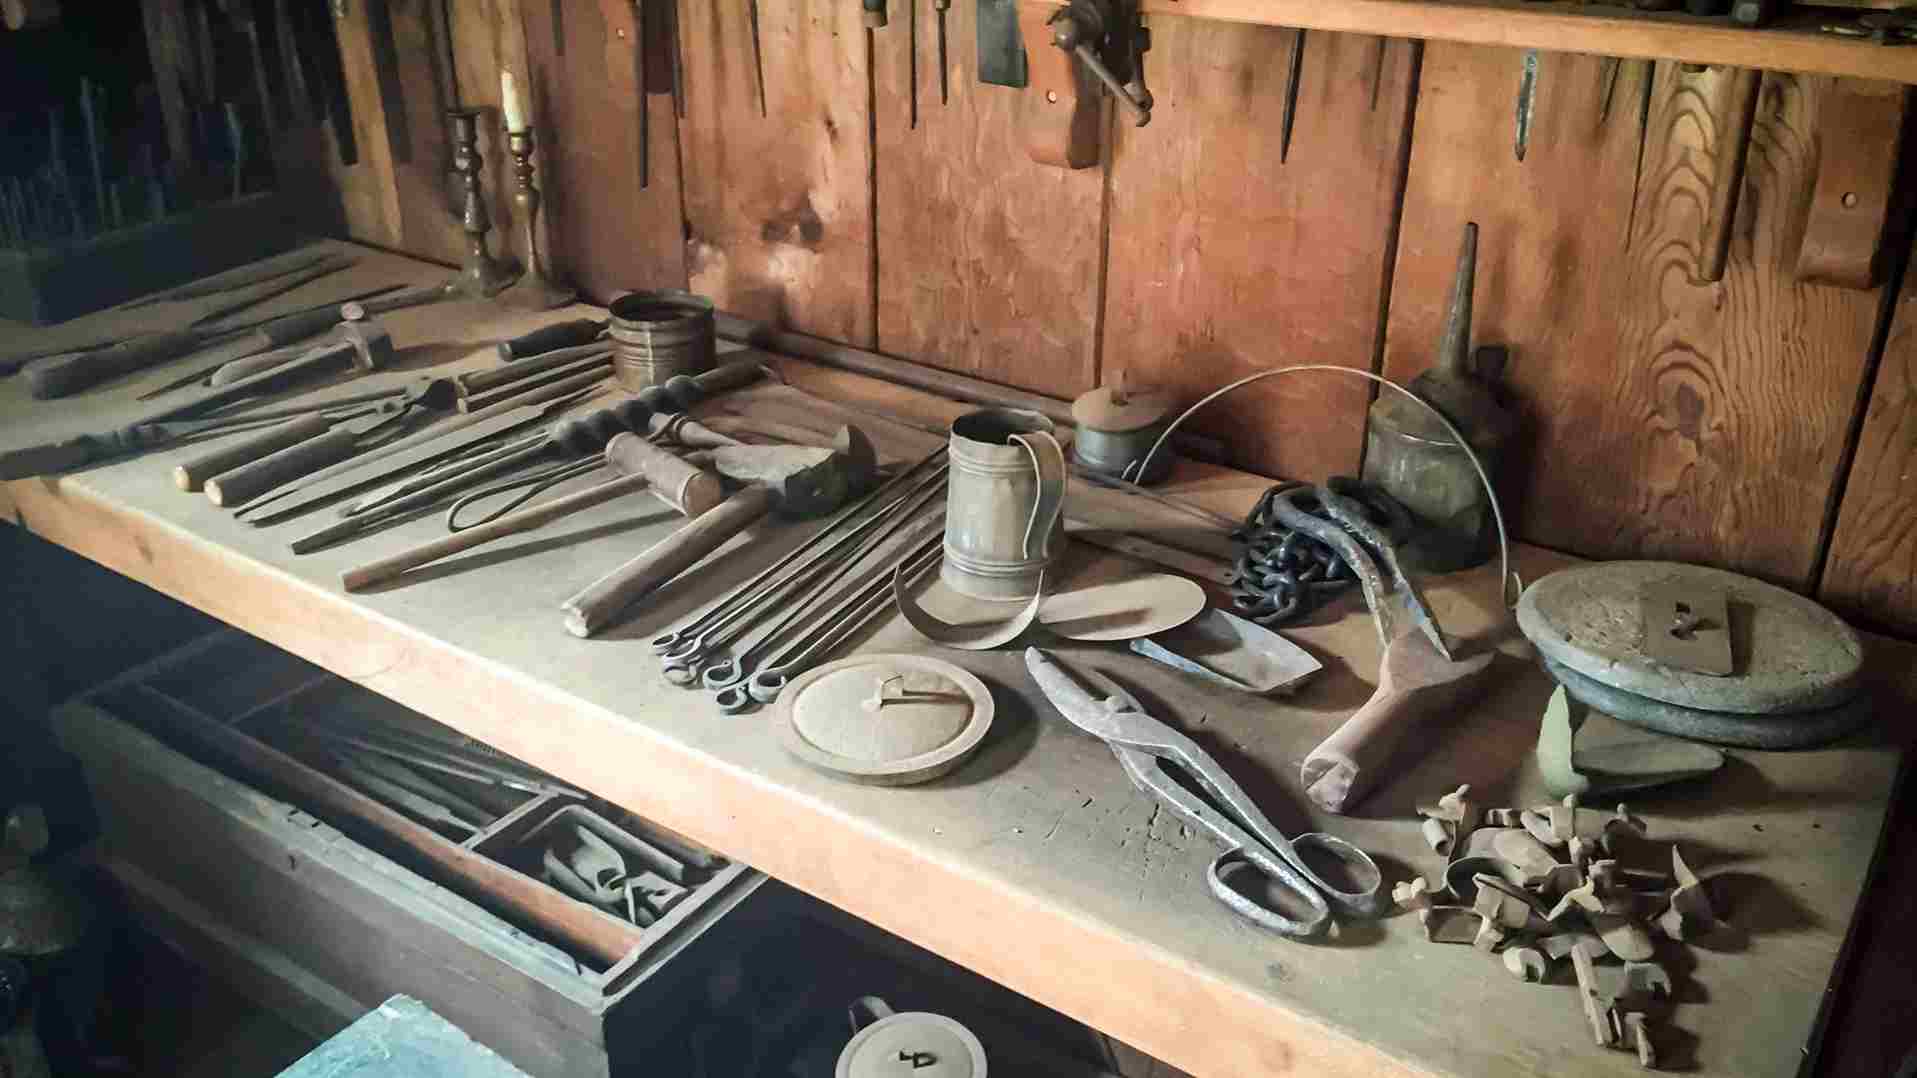 The Timelessness of Antique Tools and Restoration